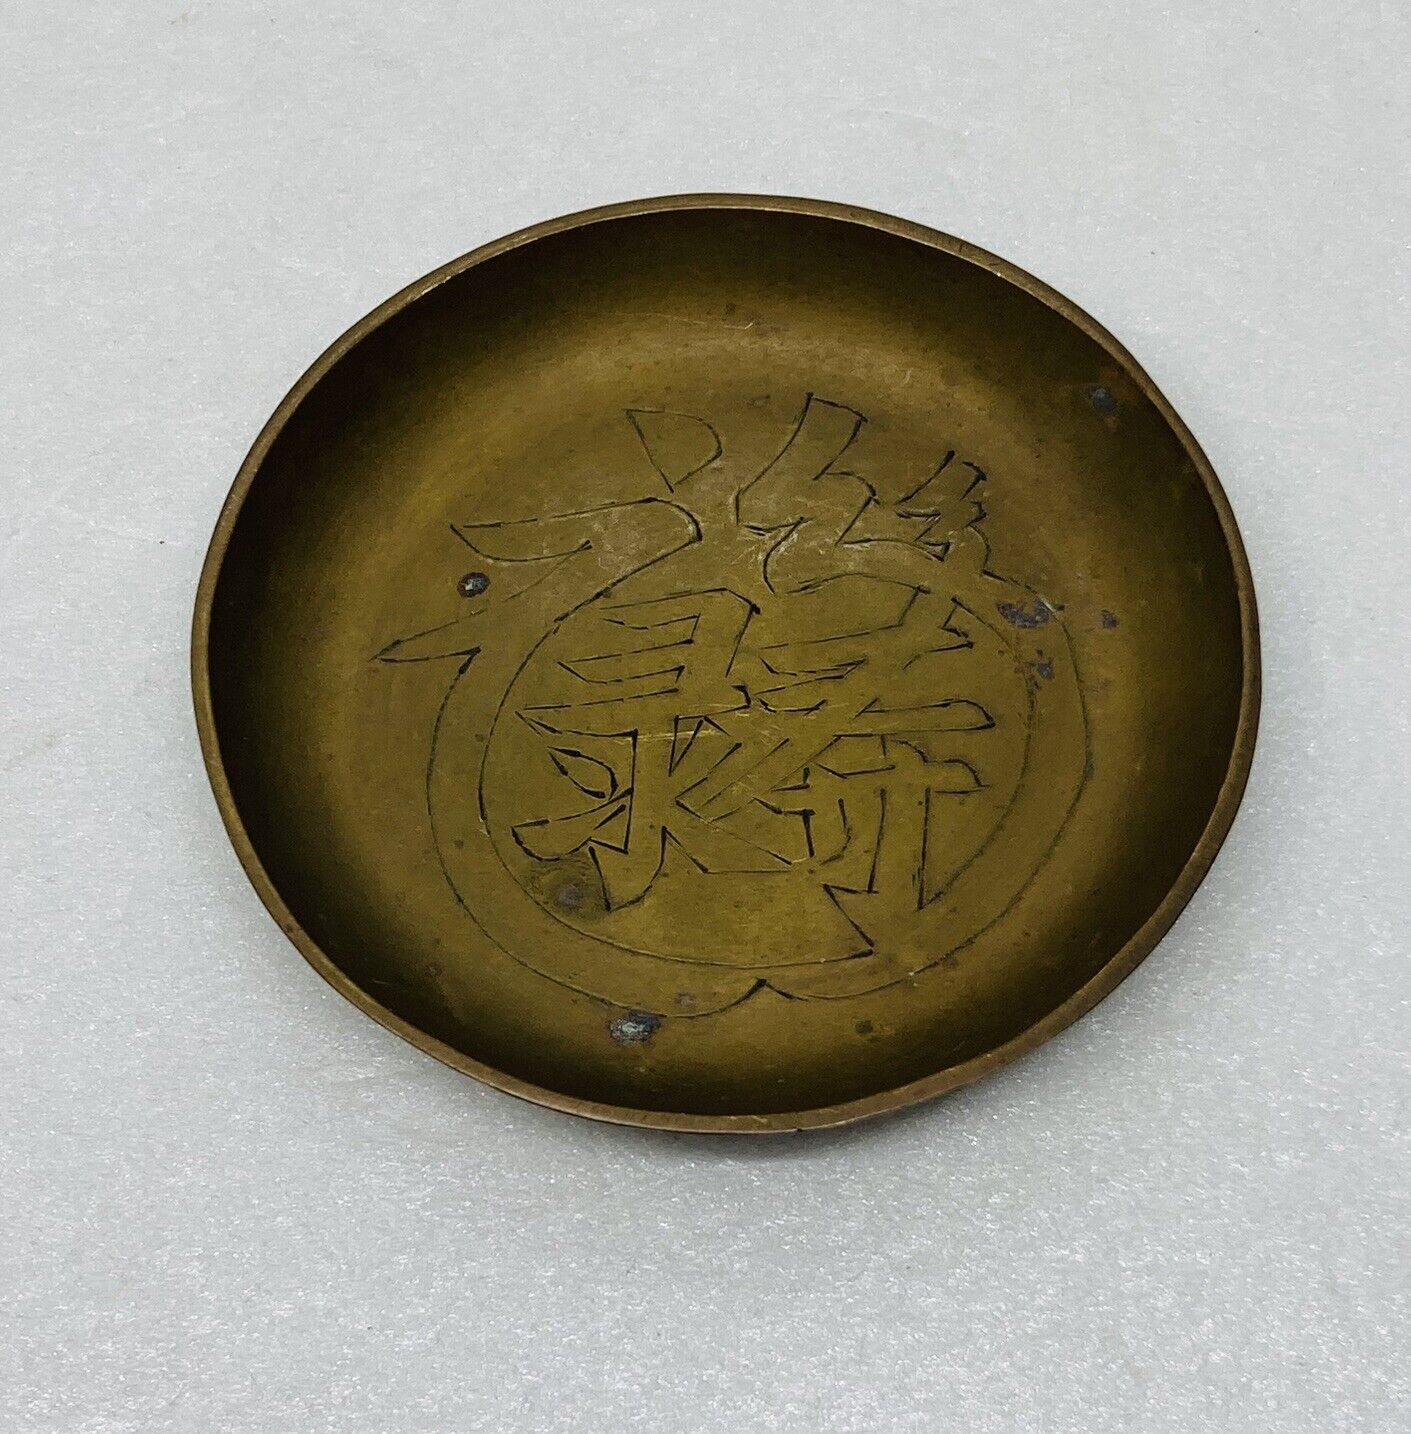 Vintage 1960s Solid Brass Drinking Coaster Carved Chinese Character Art Decor O